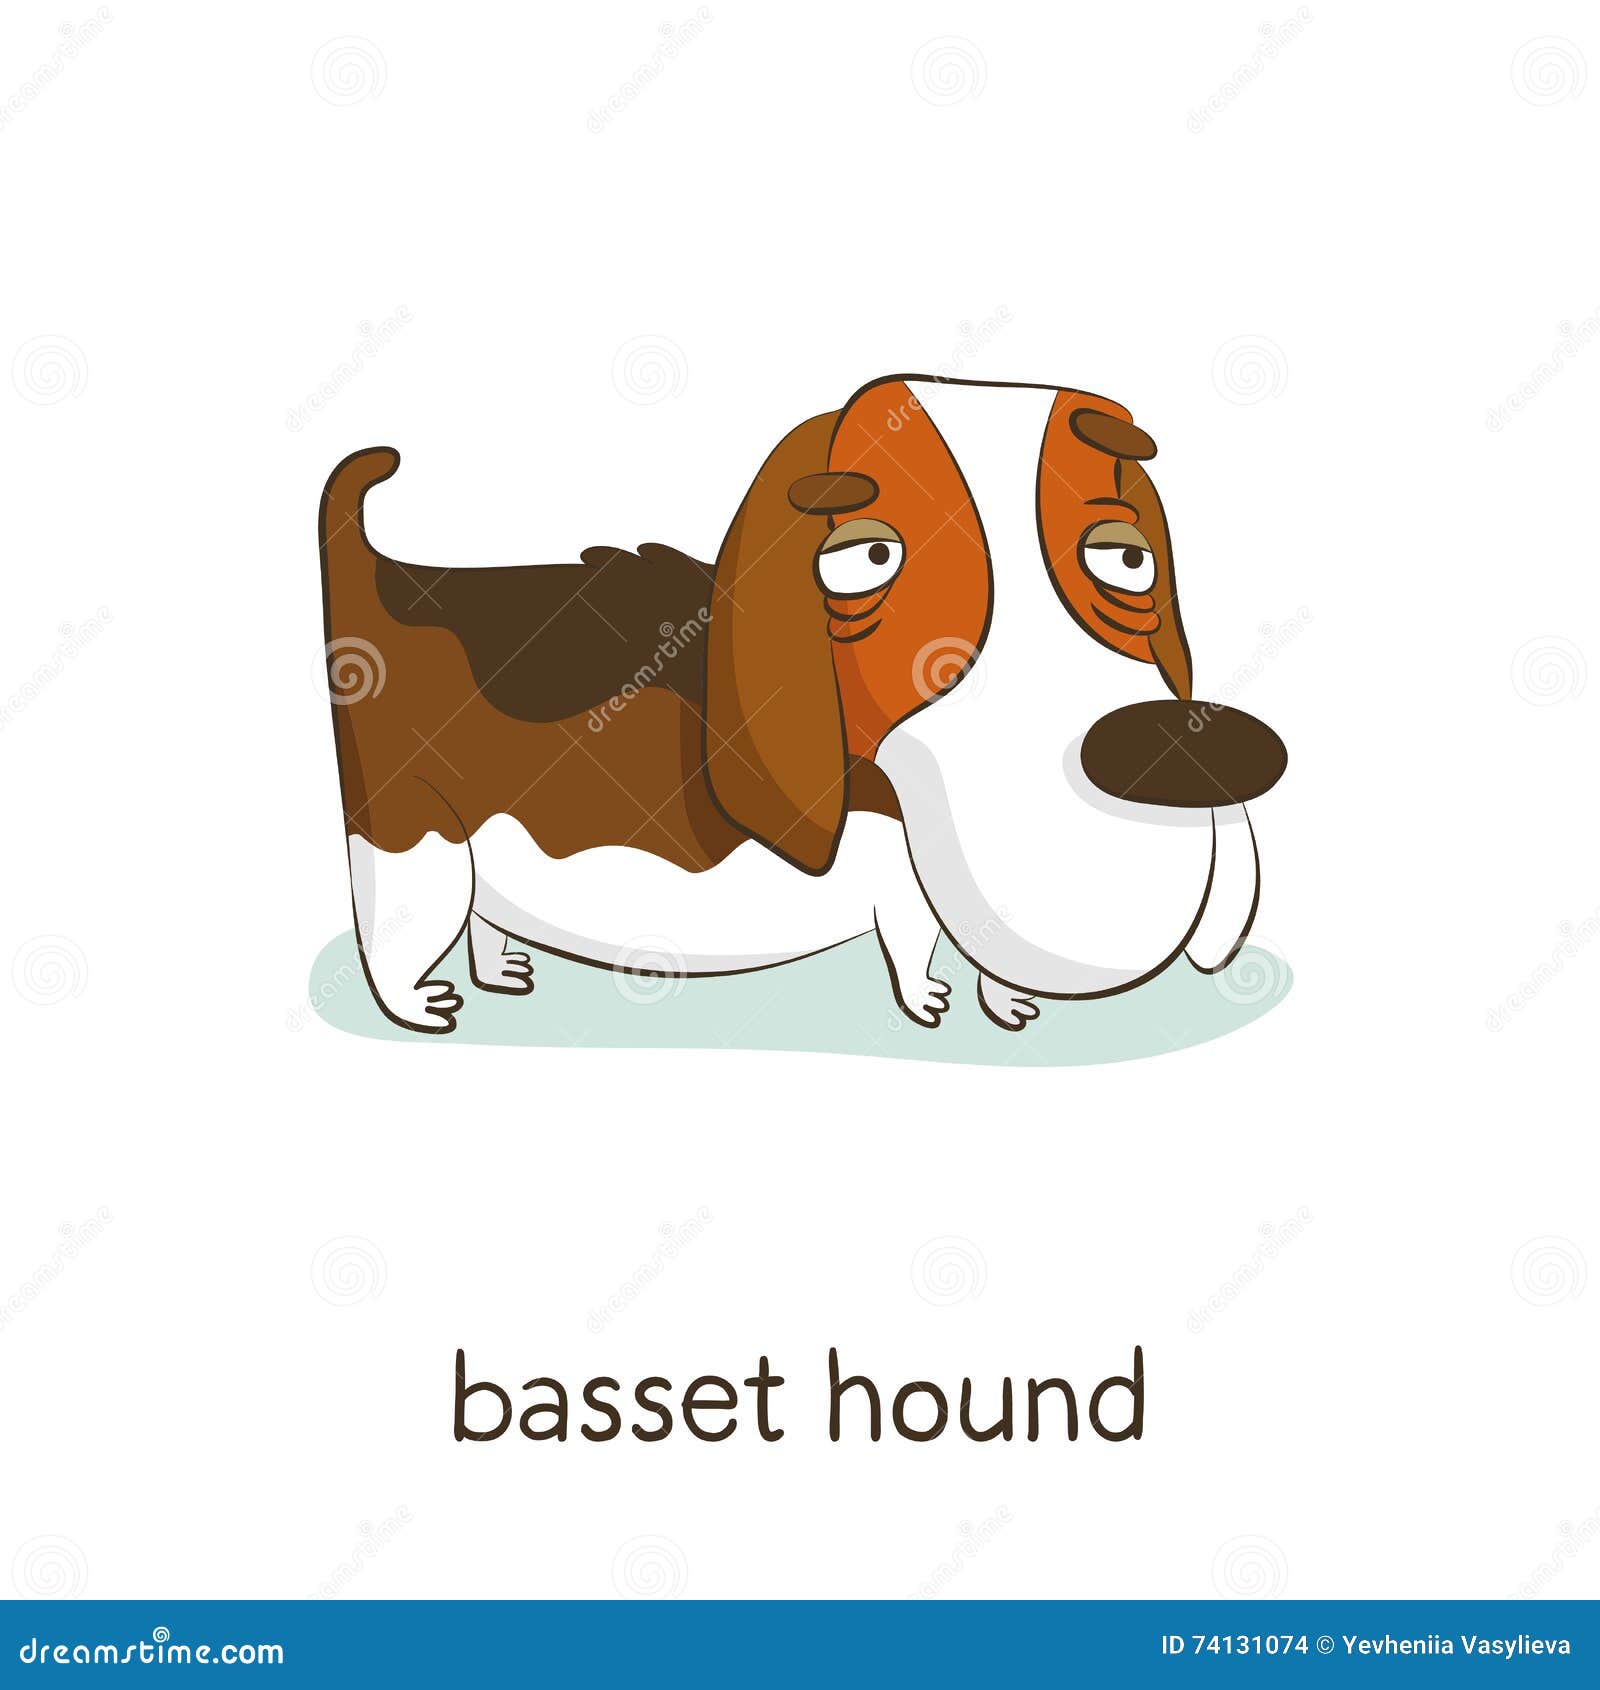 Basset Cartoons Illustrations And Vector Stock Images 325 Pictures To Download From